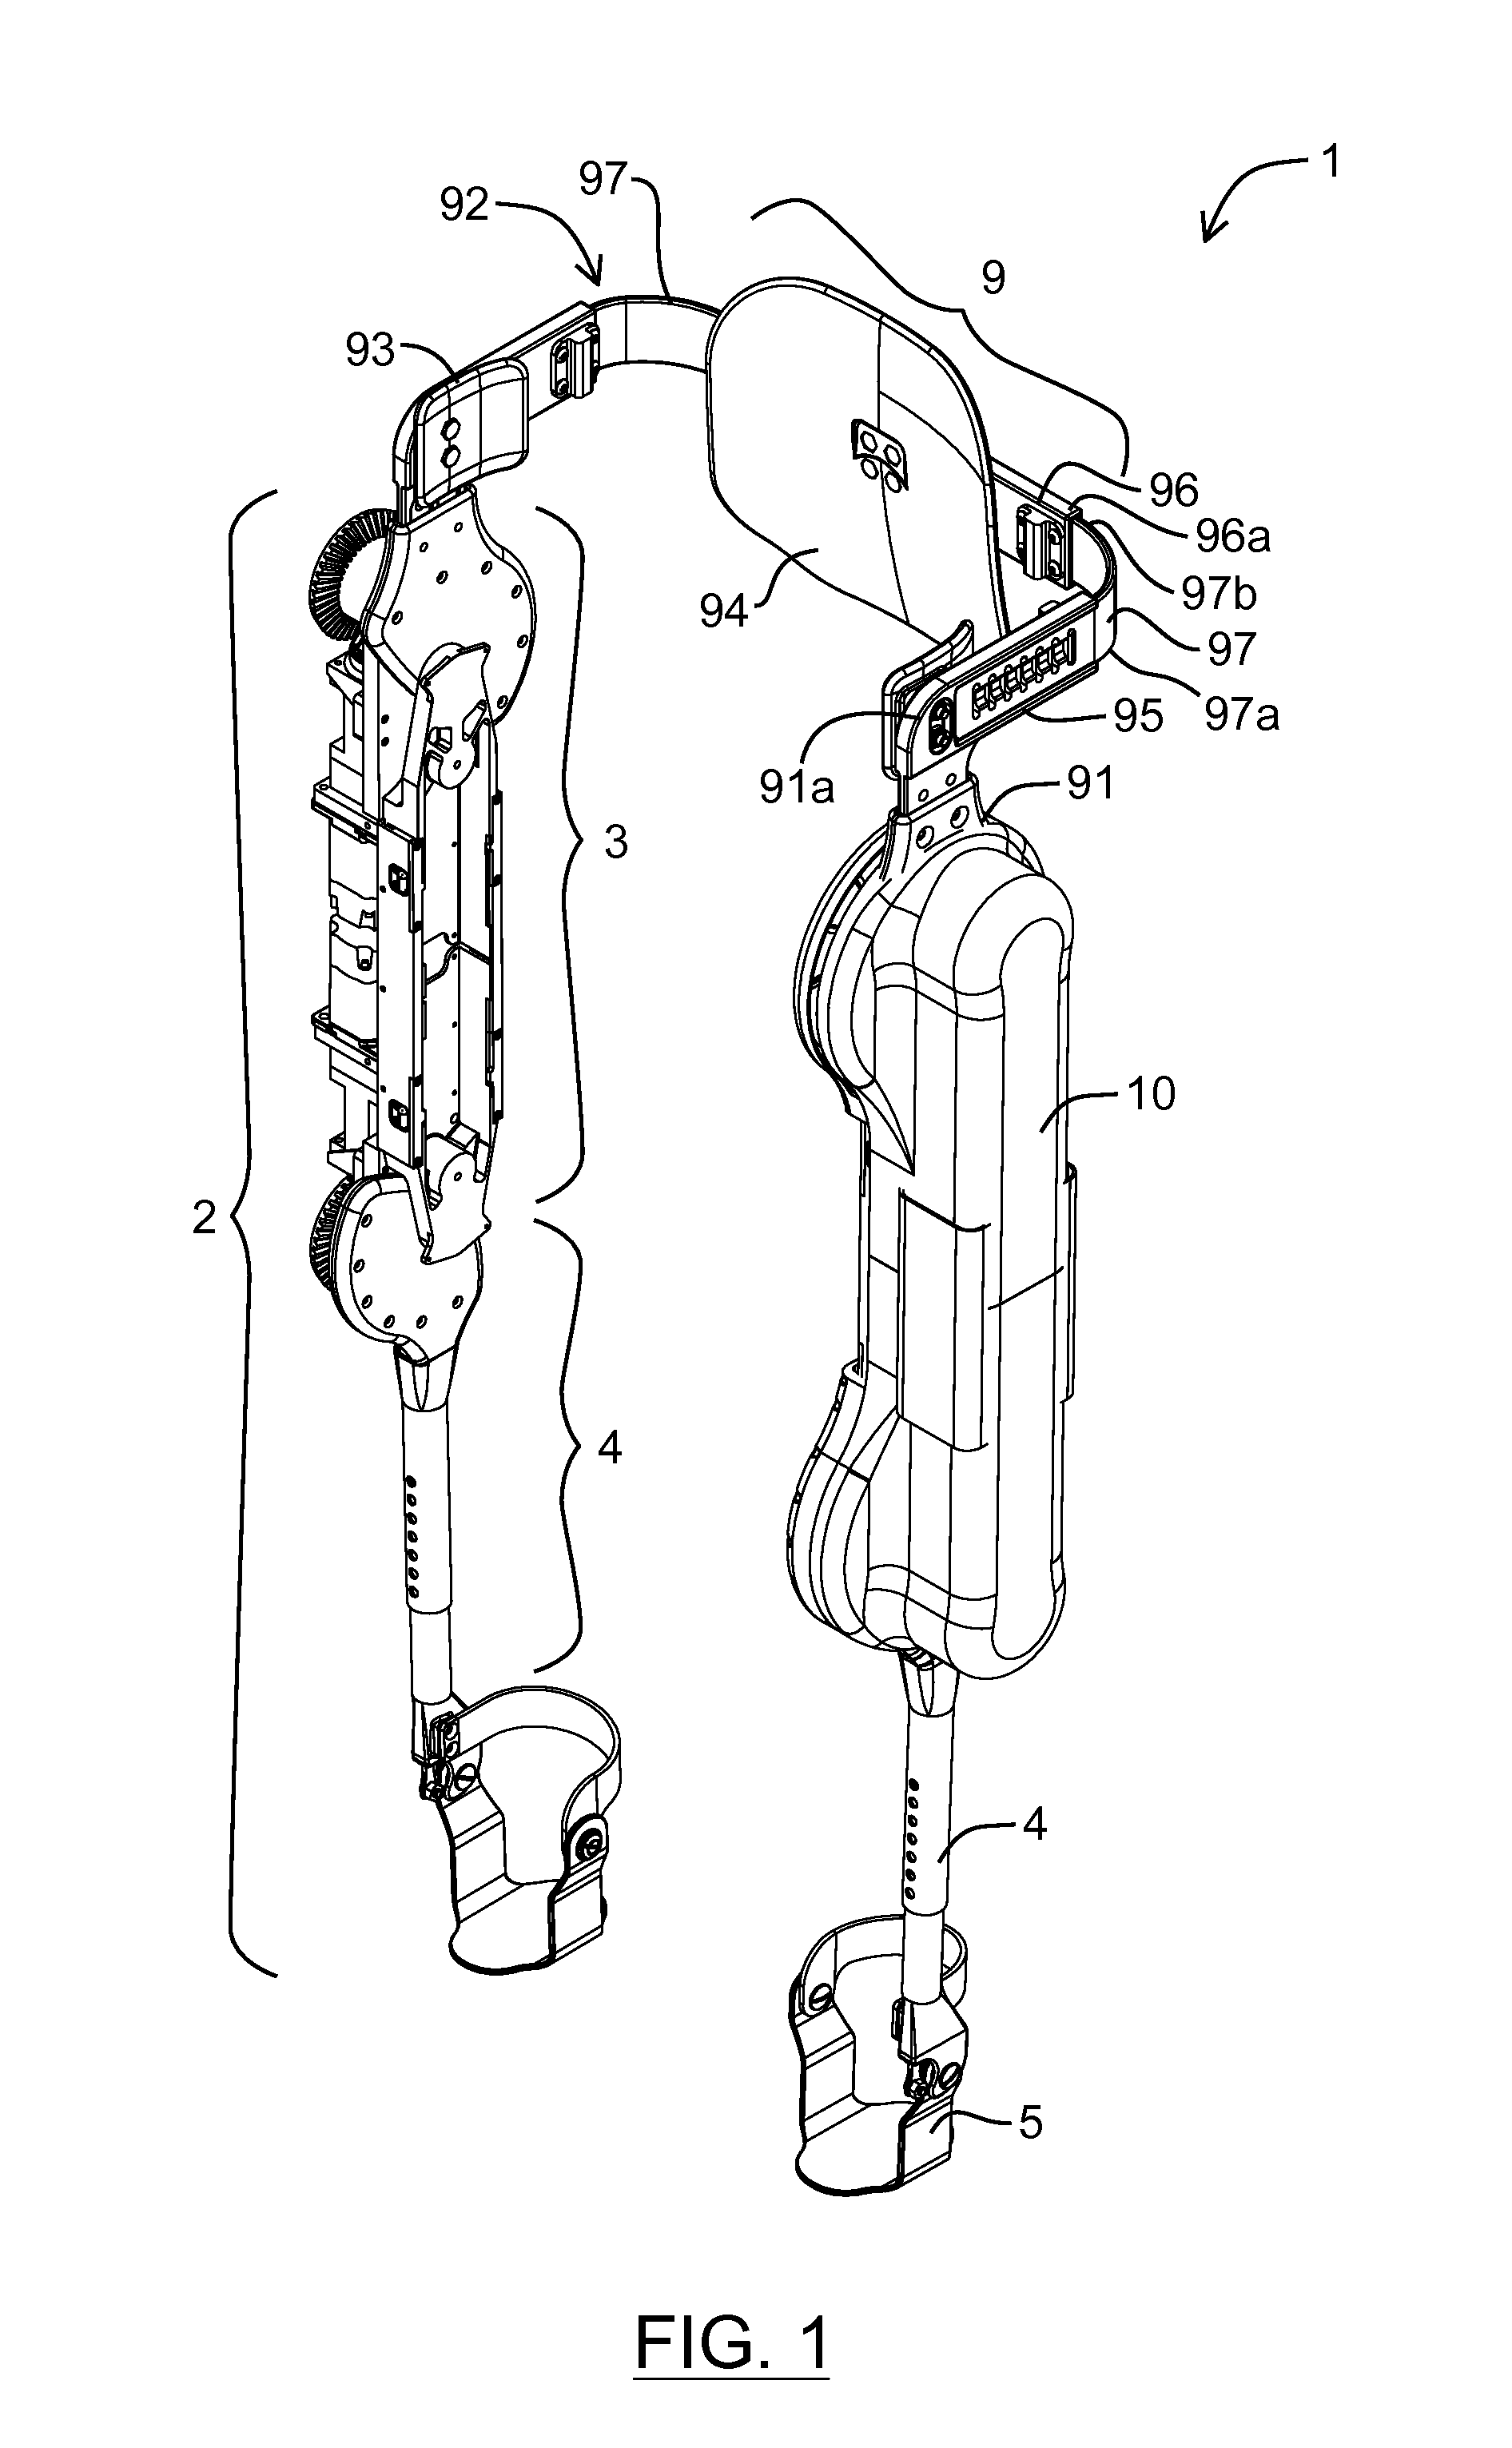 Strap assembly for use in an exoskeleton apparatus